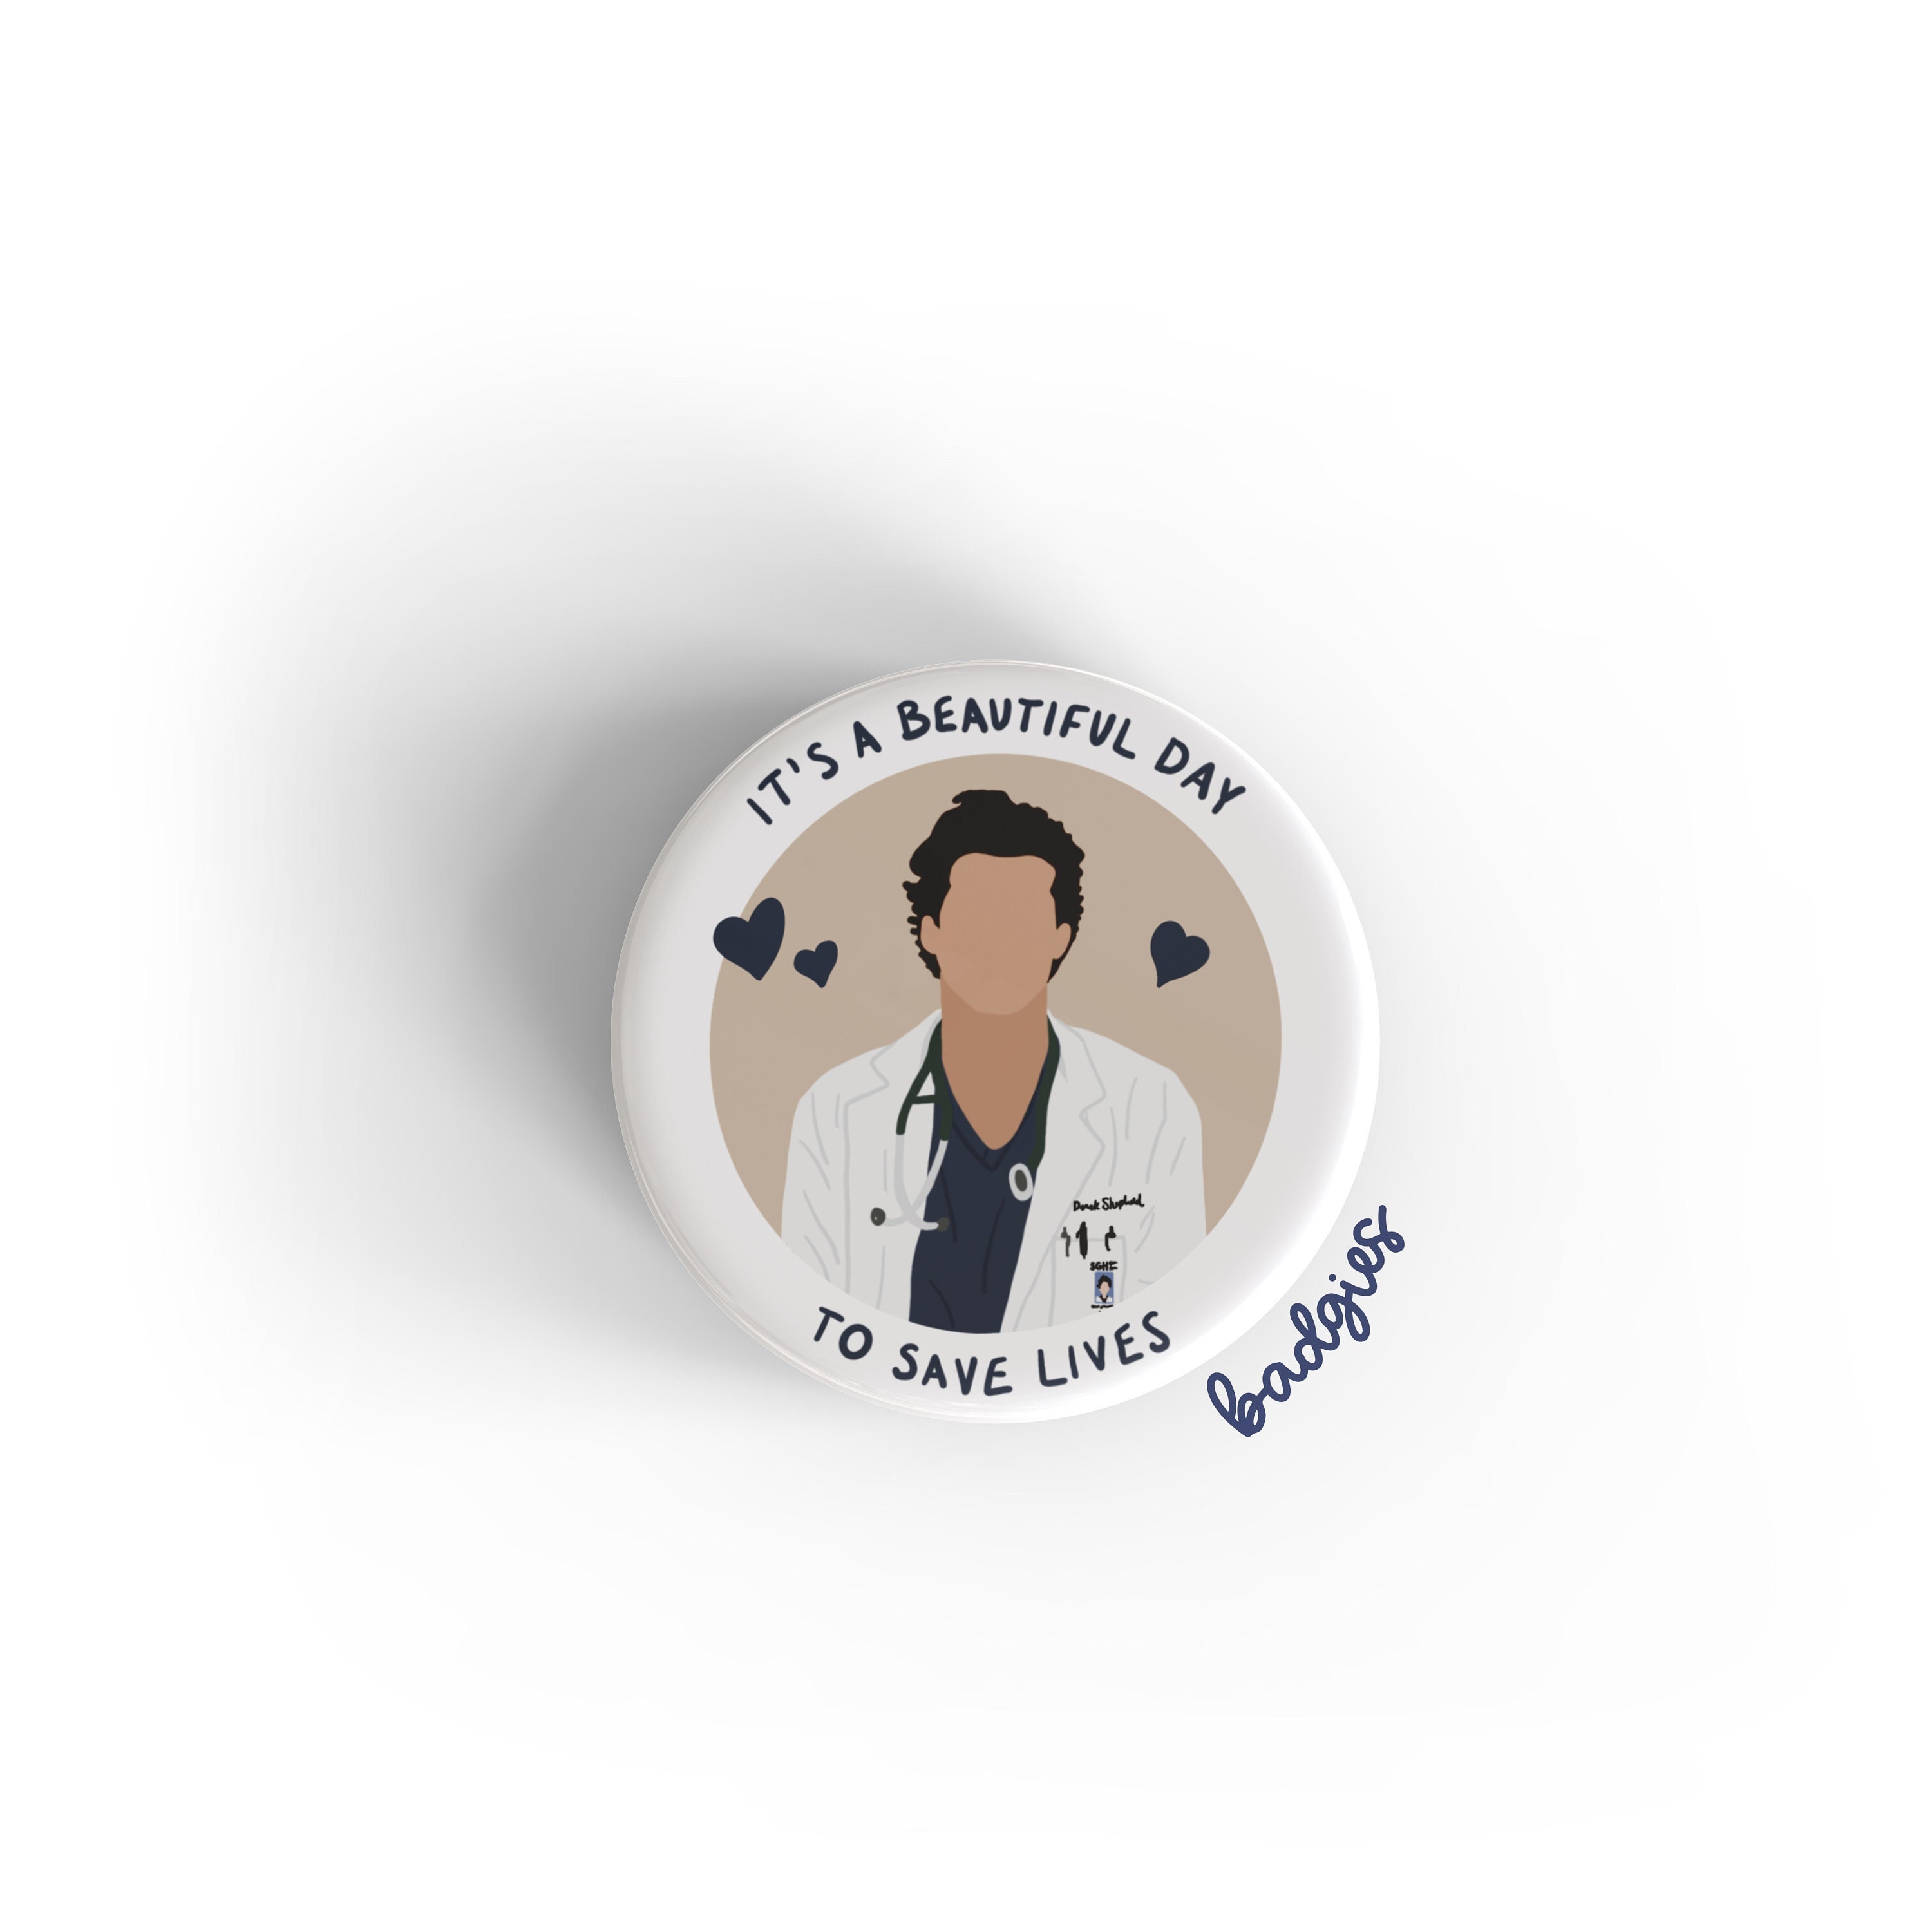 Mcdreamy It's A Beautiful Day to Save Lives badgie, Grey's Anatomy Badge Reel Cover, RN, ER Nurse Gift, Intern, Surgical, Med SURG, Surgery